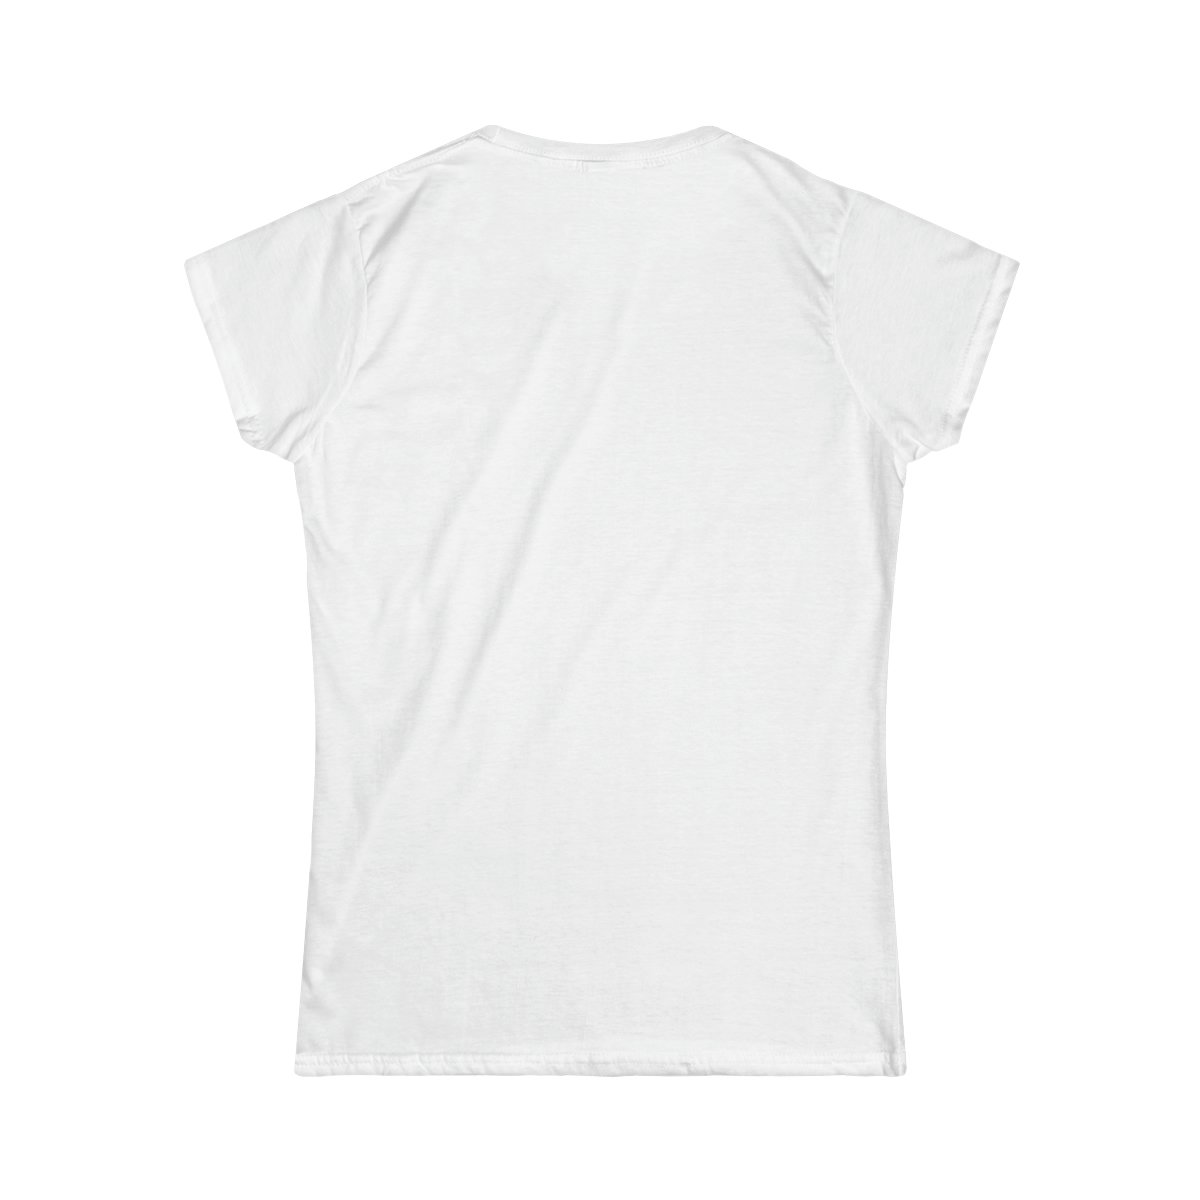 The Imperials – The Way Women’s Short Sleeve Tshirt 64000L